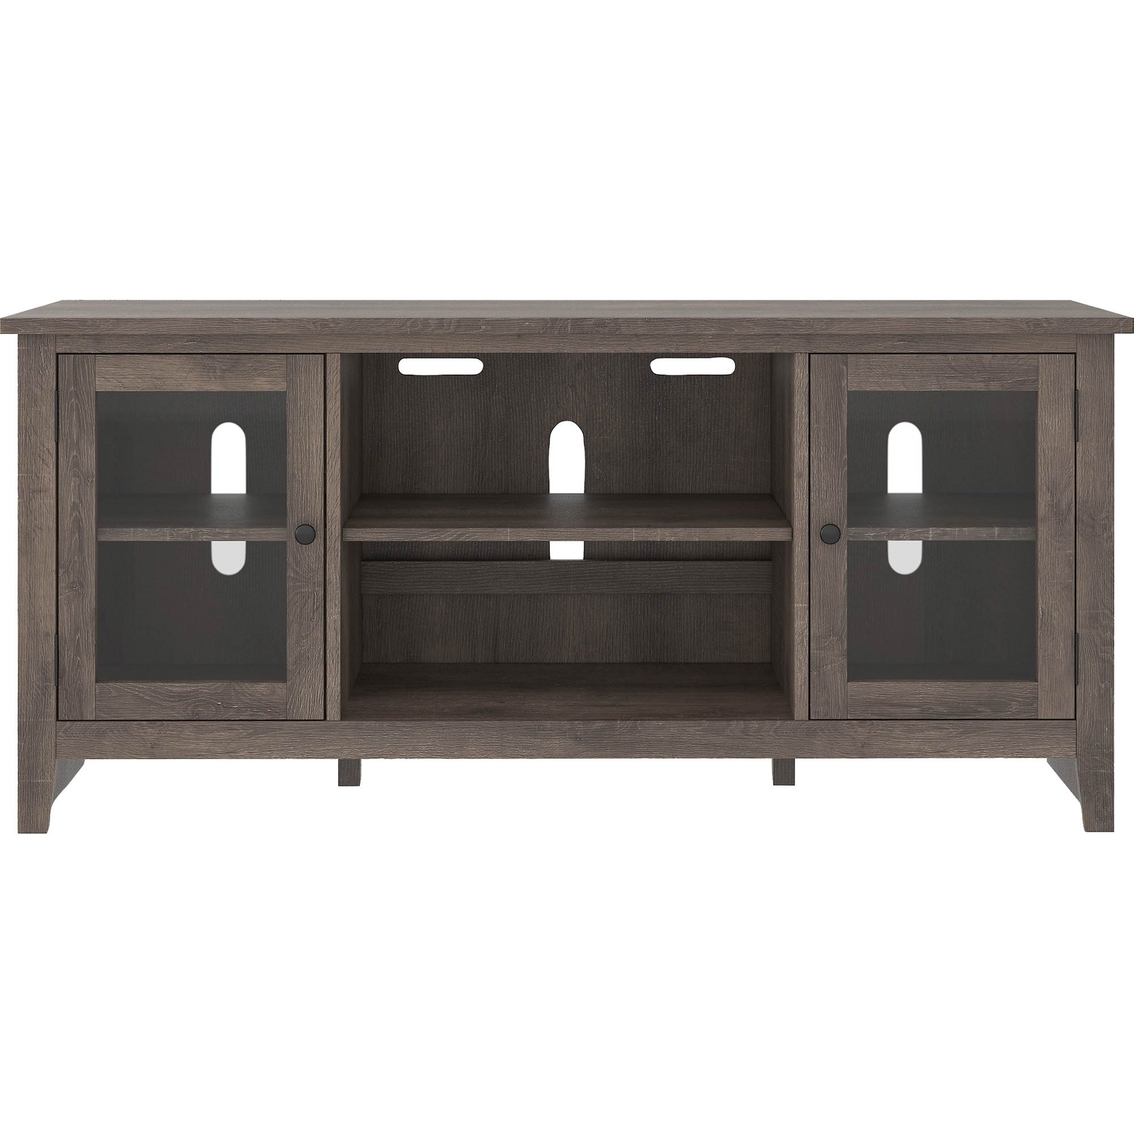 Signature Design by Ashley Arlenbry Large 60 in. Wide TV Stand - Image 2 of 5